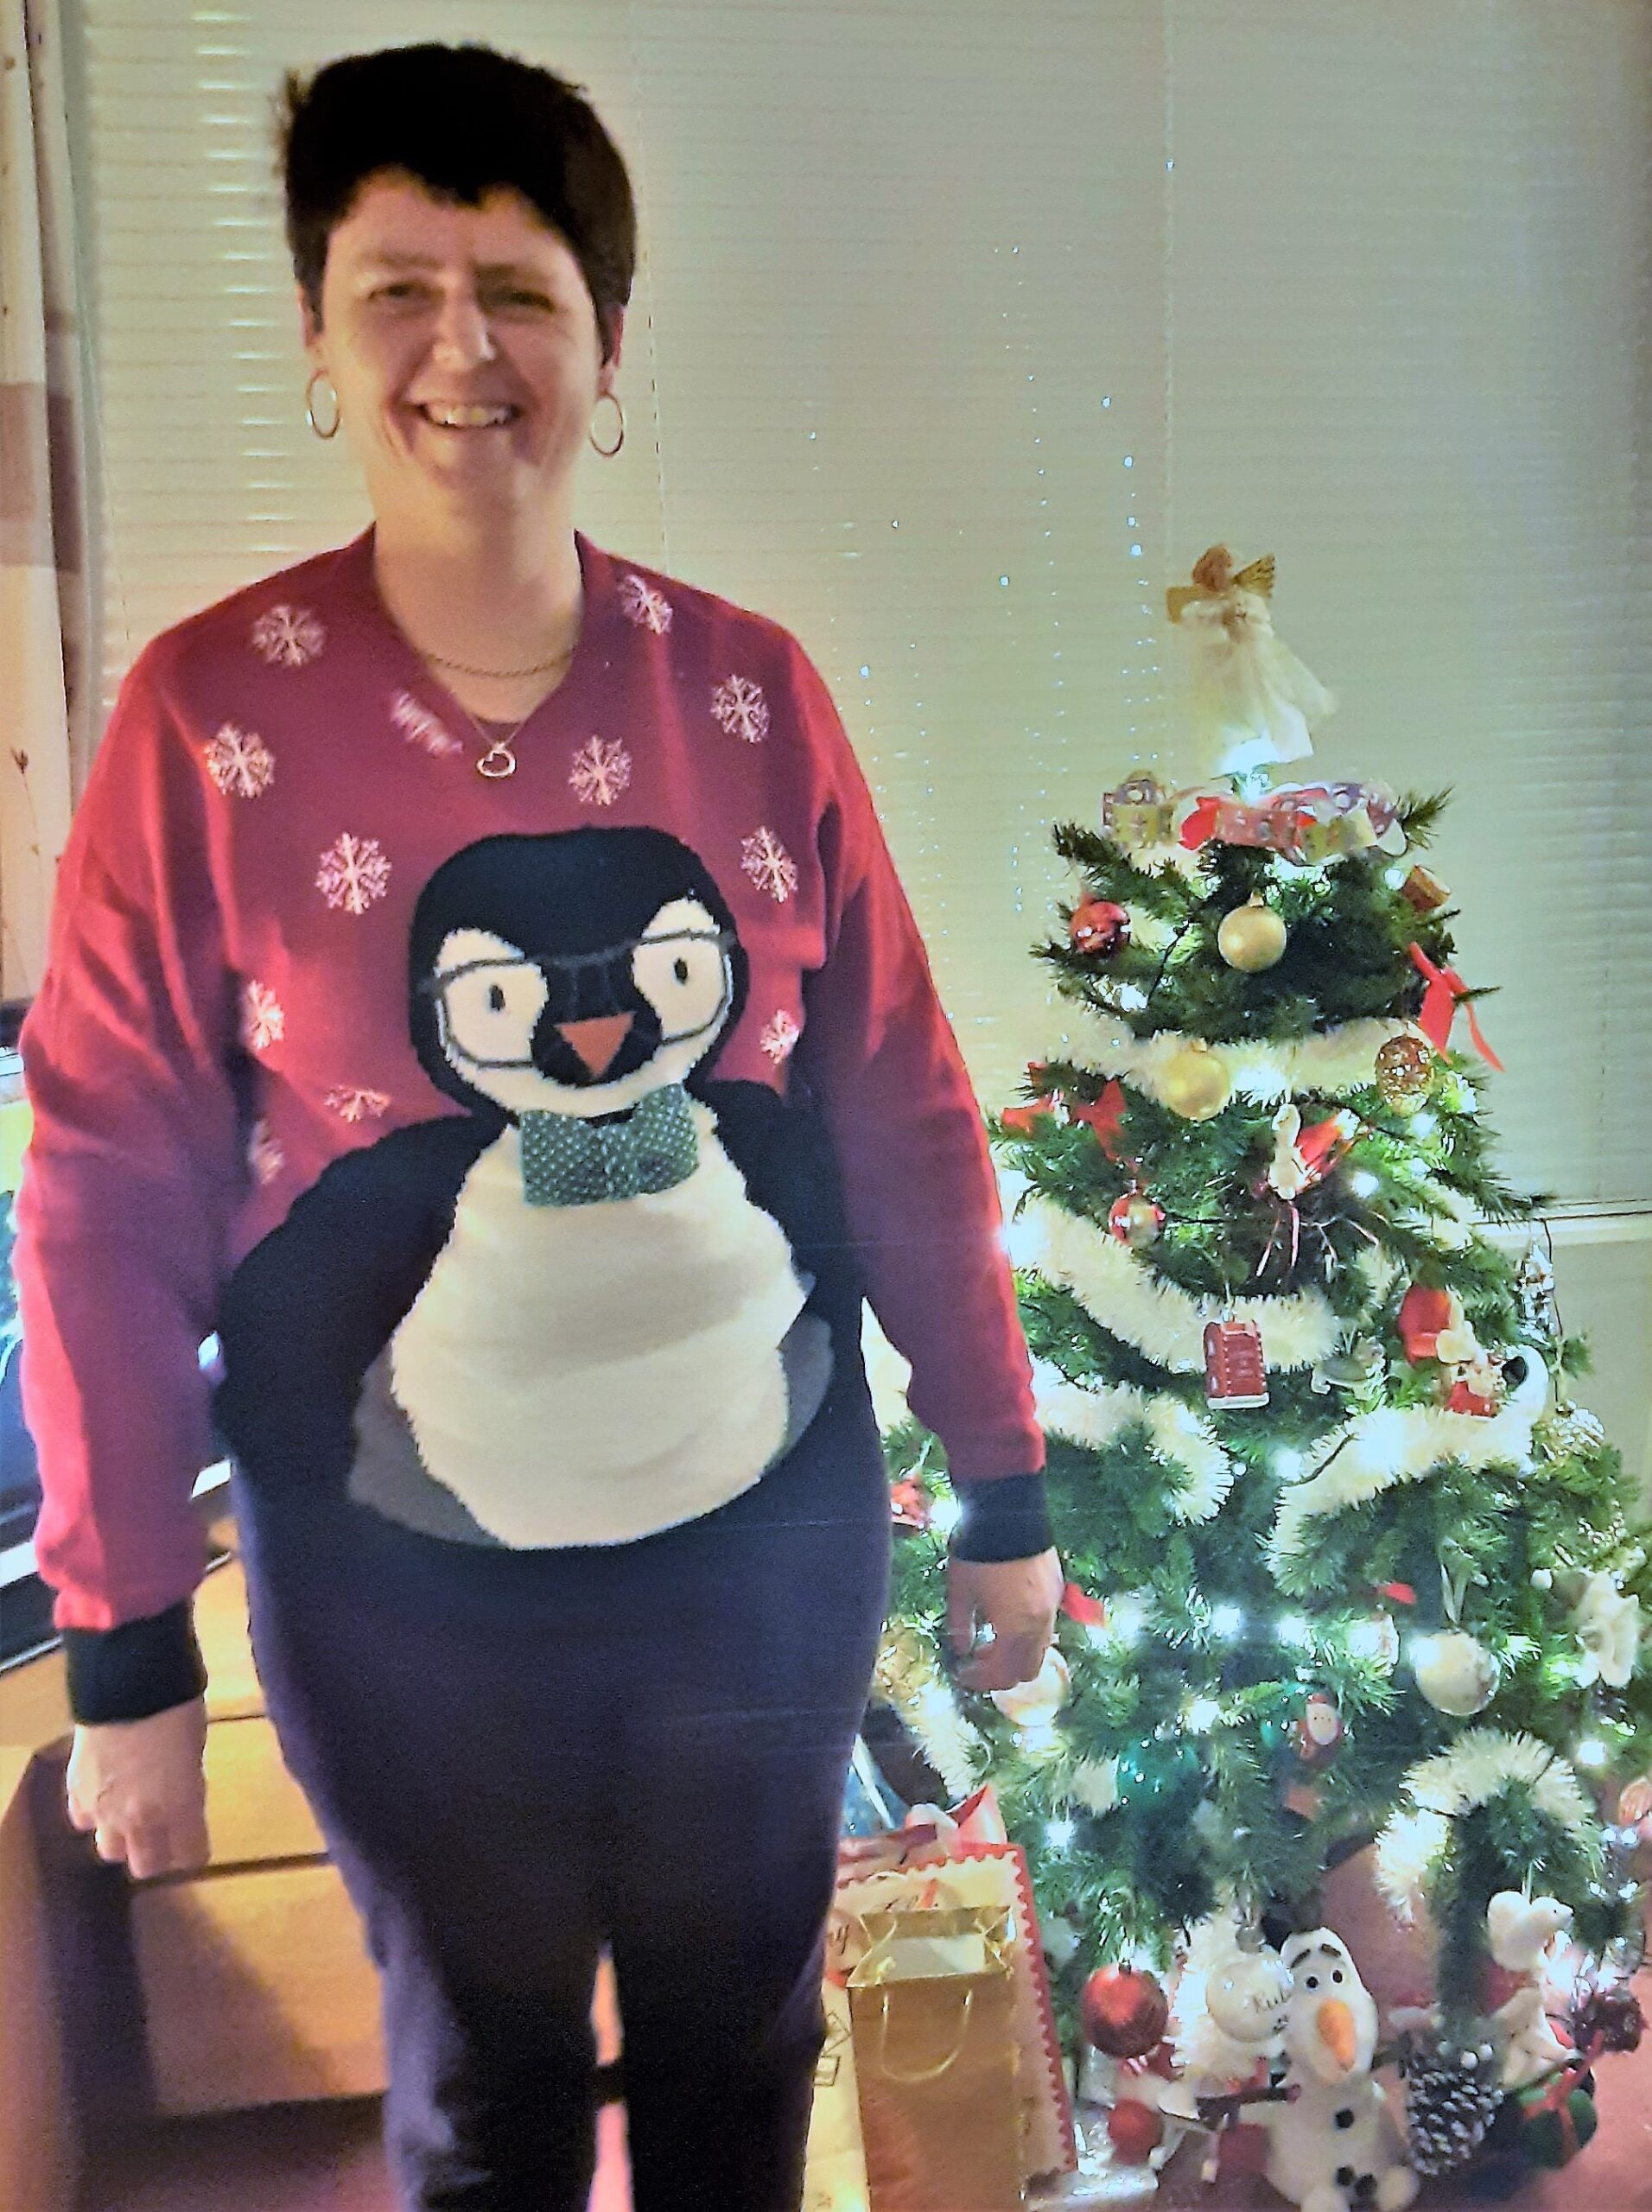 Wear your Christmas jumper to work day